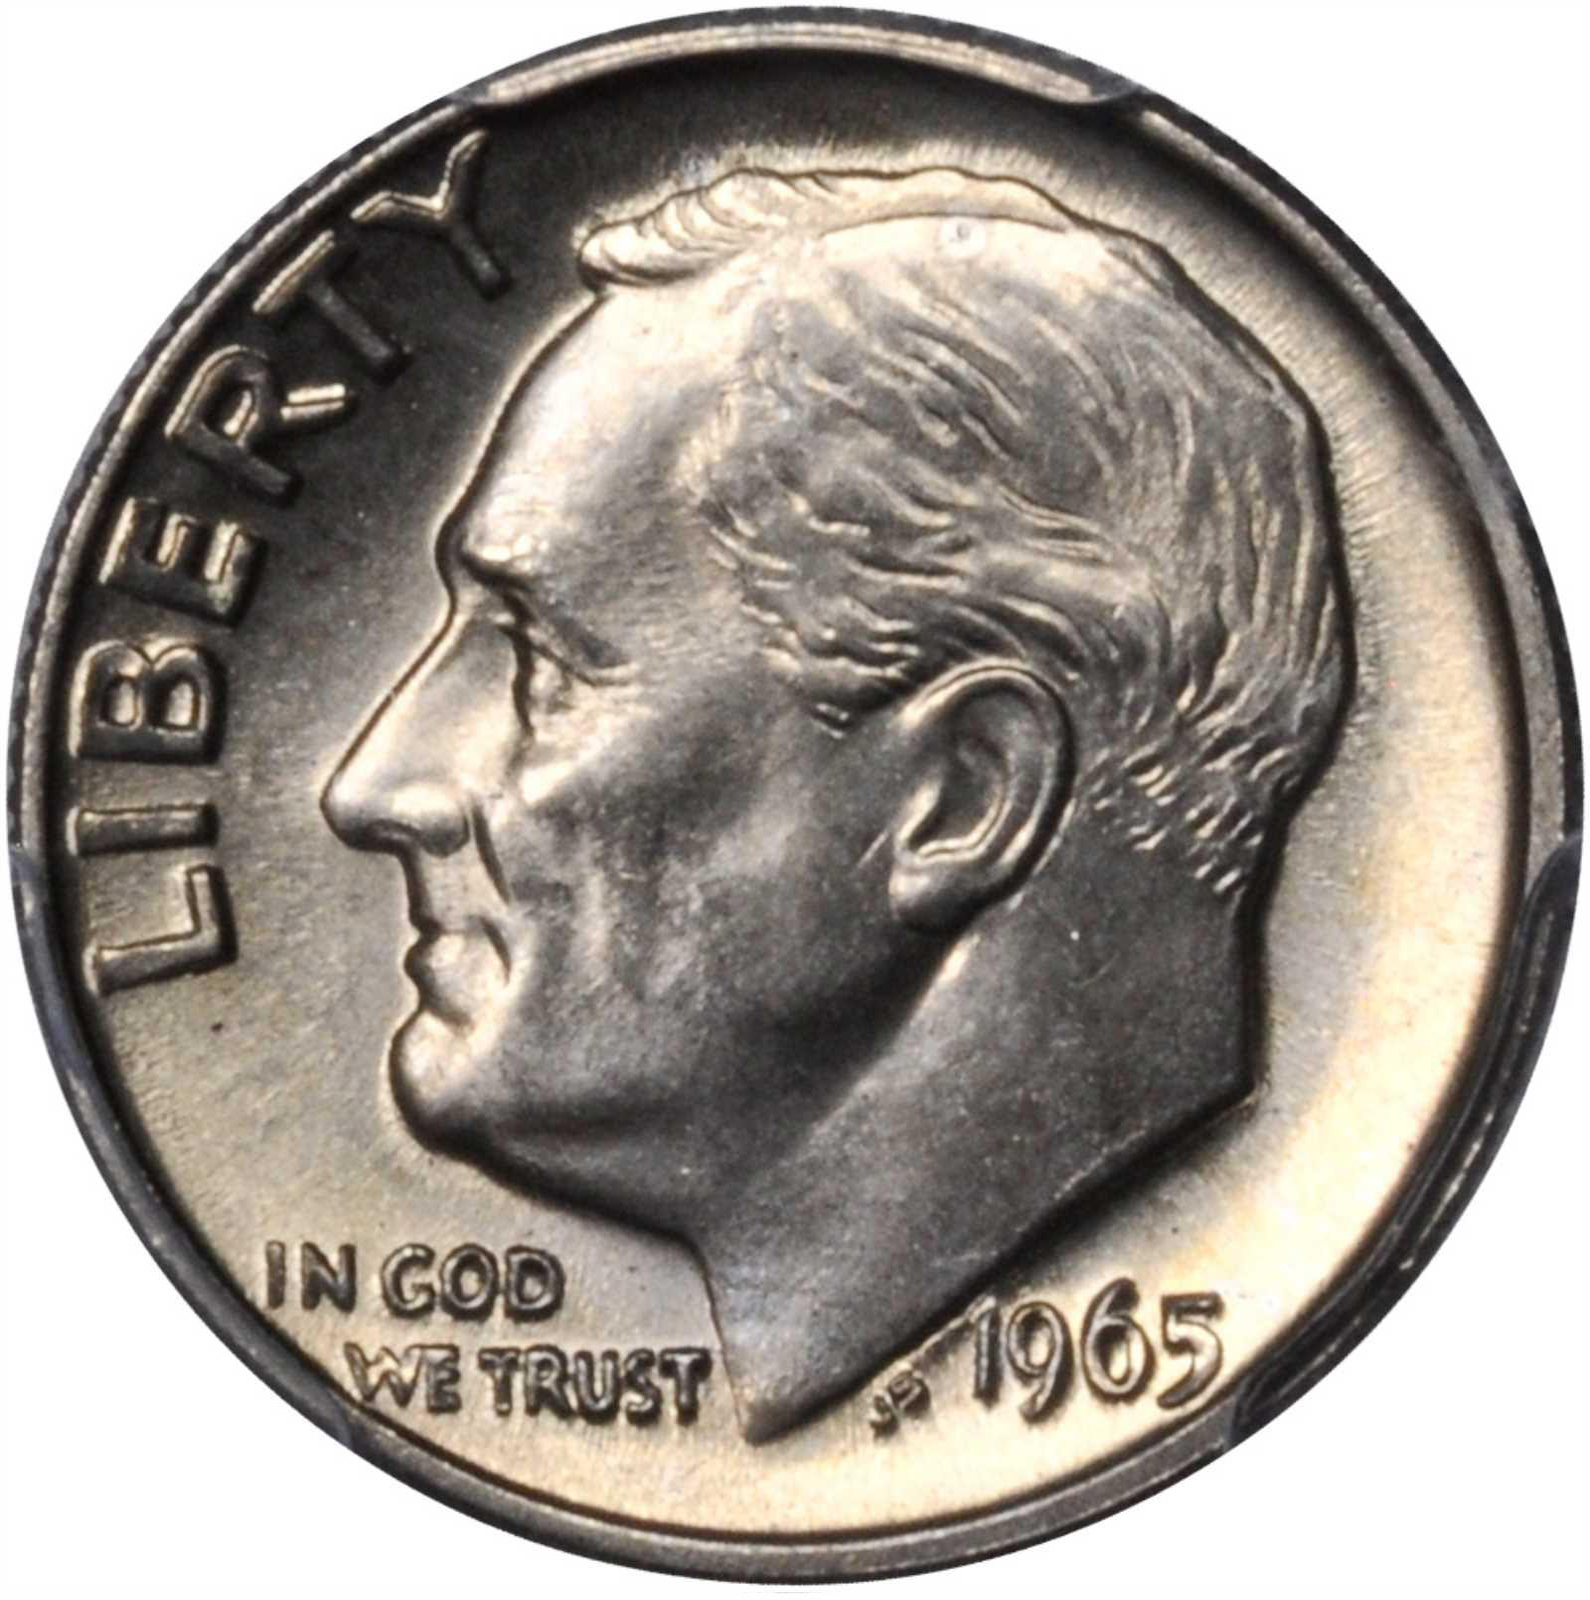 Value Of 1965 Dime Sell And Auction Rare Coin Buyers,Homemade Meatloaf How To Cook Meatloaf